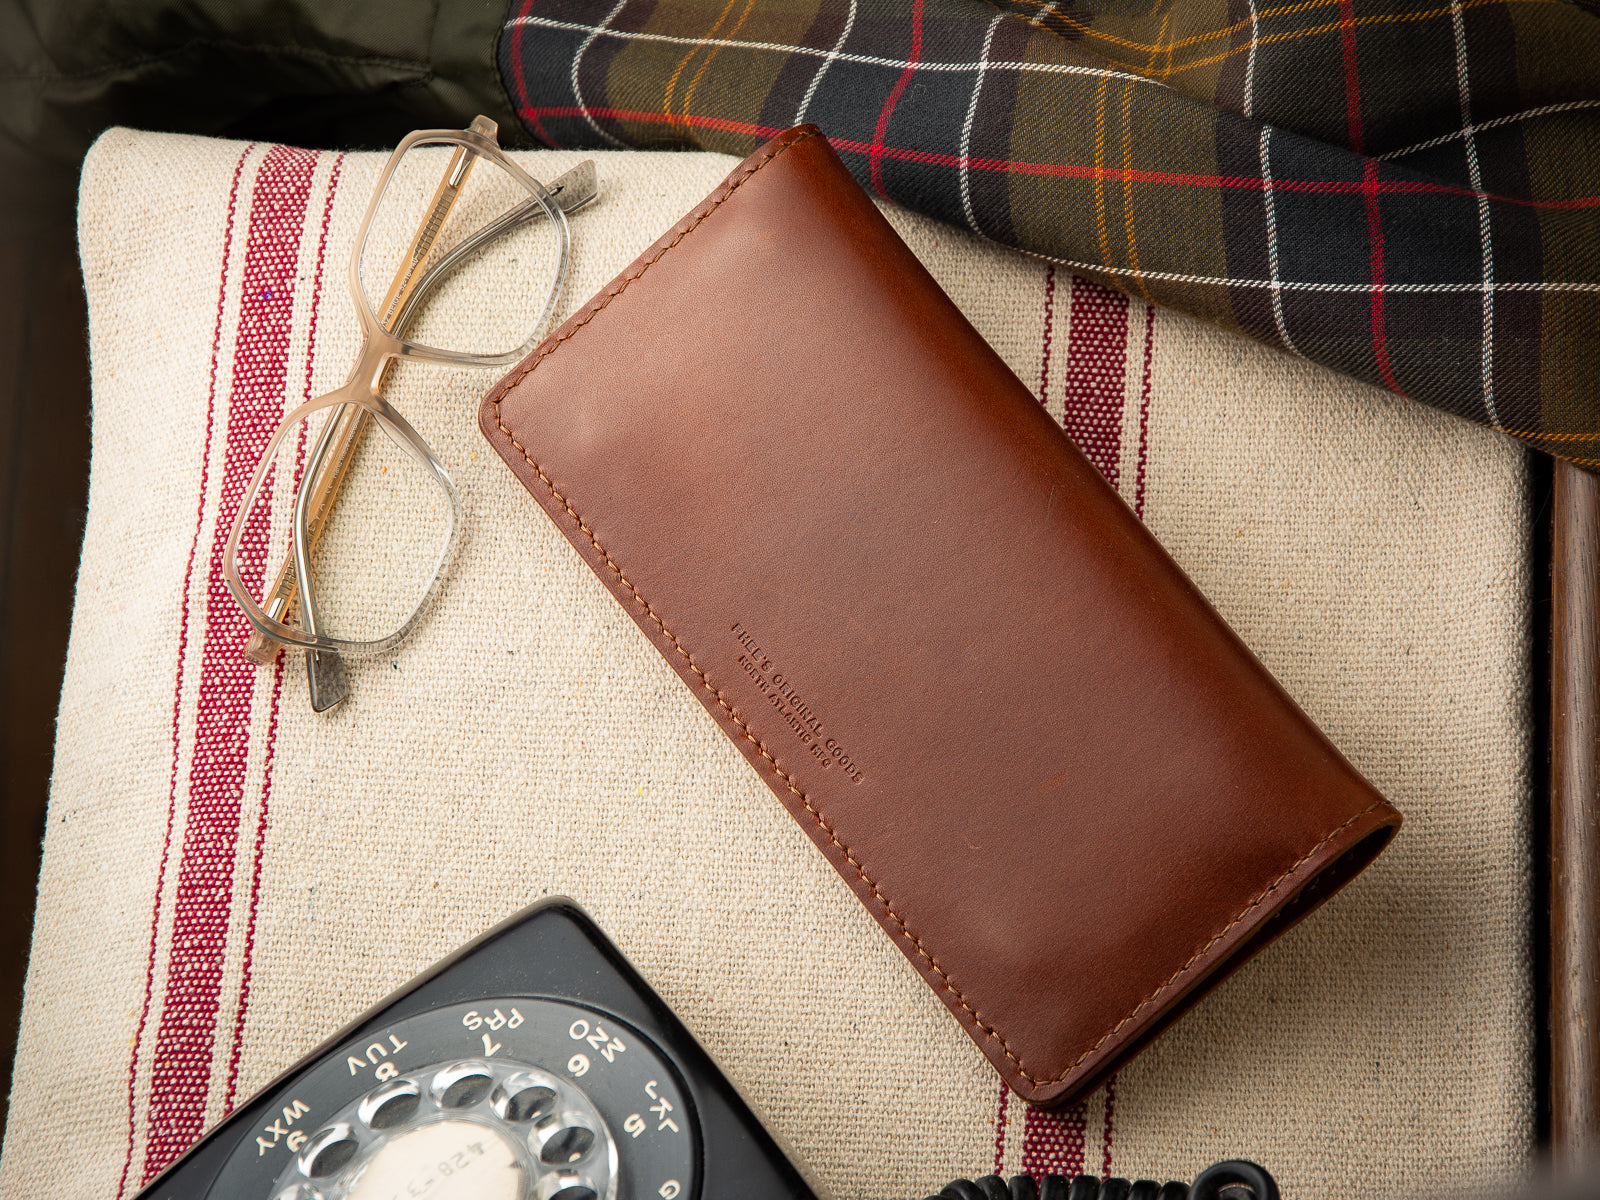 Closed over brown leather Rosedale large wallet sitting on a telephone table